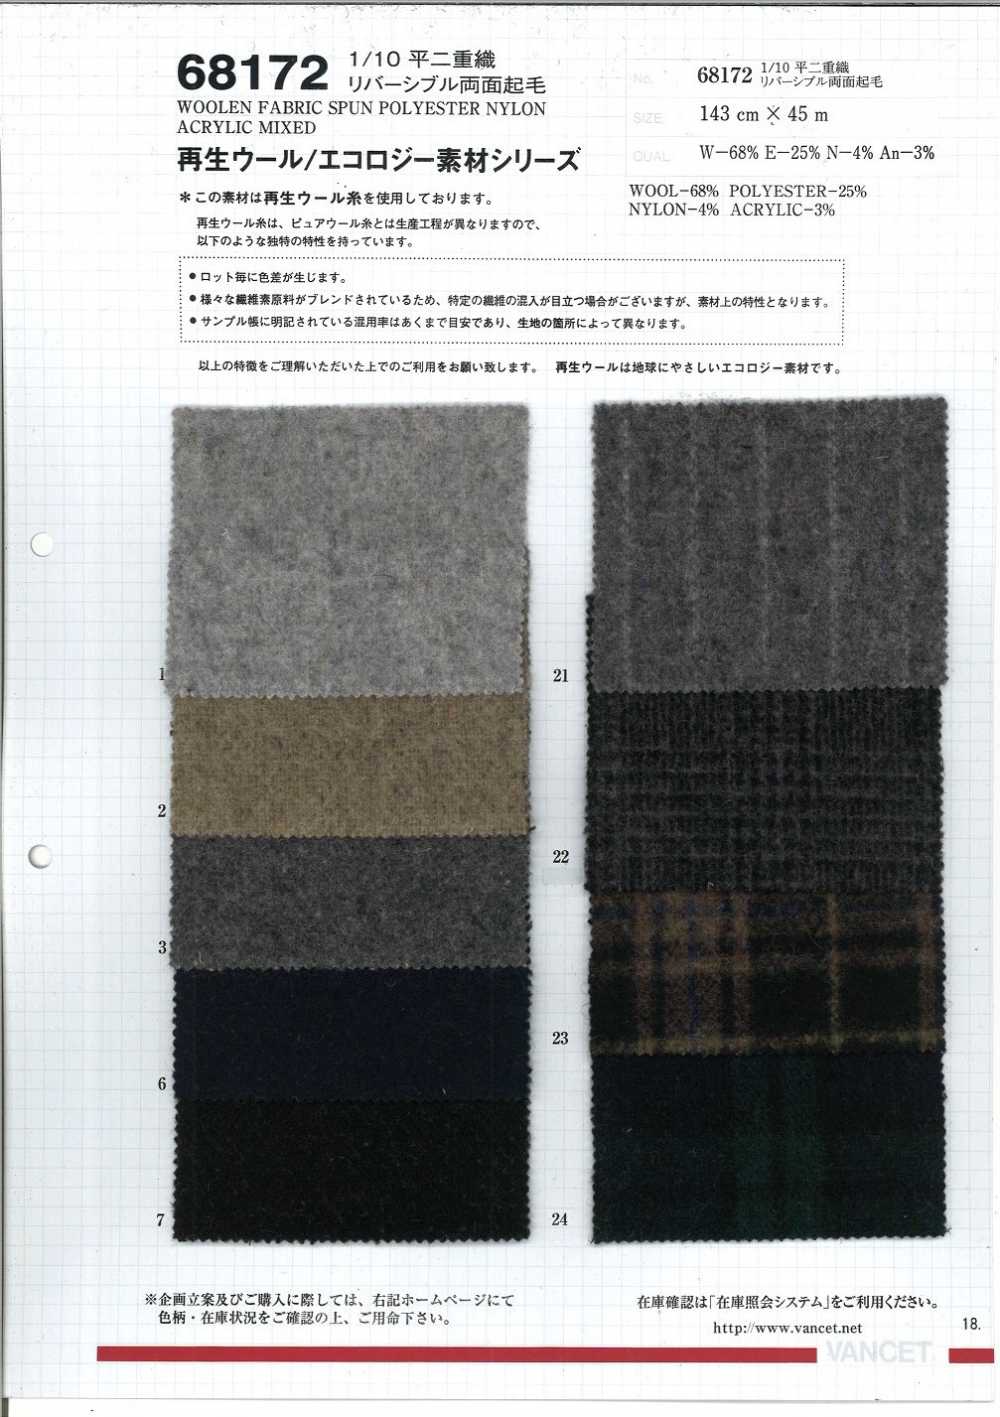 68172 1/10 Flat Double Weave, Reversible Fuzzy On Both Sides [uses Recycled Wool Thread][Textile / Fabric] VANCET